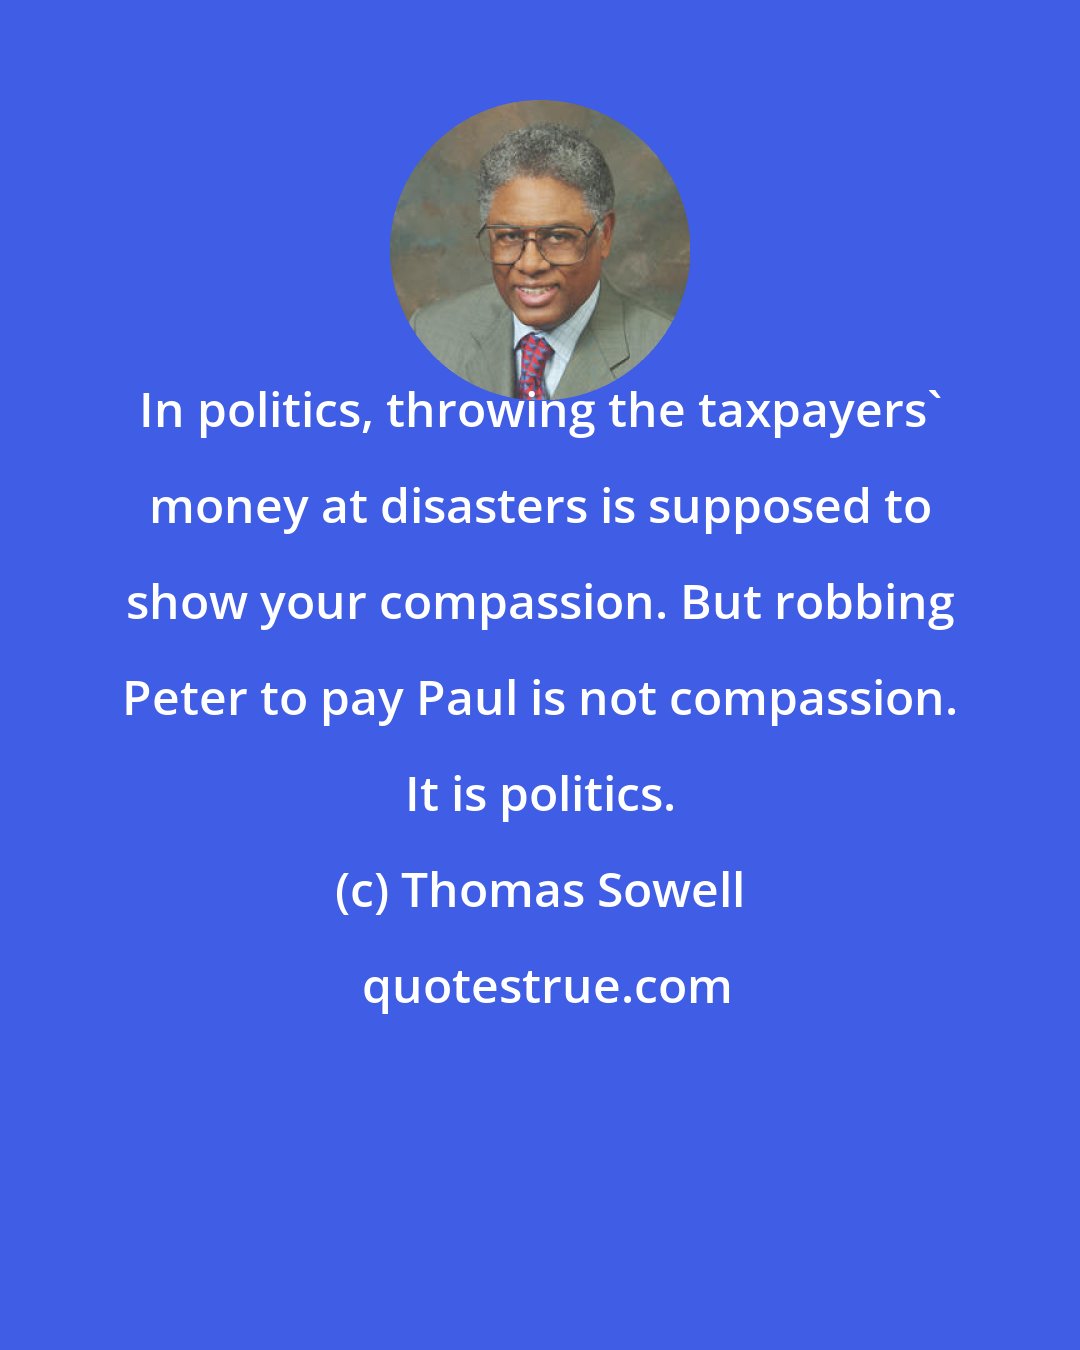 Thomas Sowell: In politics, throwing the taxpayers' money at disasters is supposed to show your compassion. But robbing Peter to pay Paul is not compassion. It is politics.